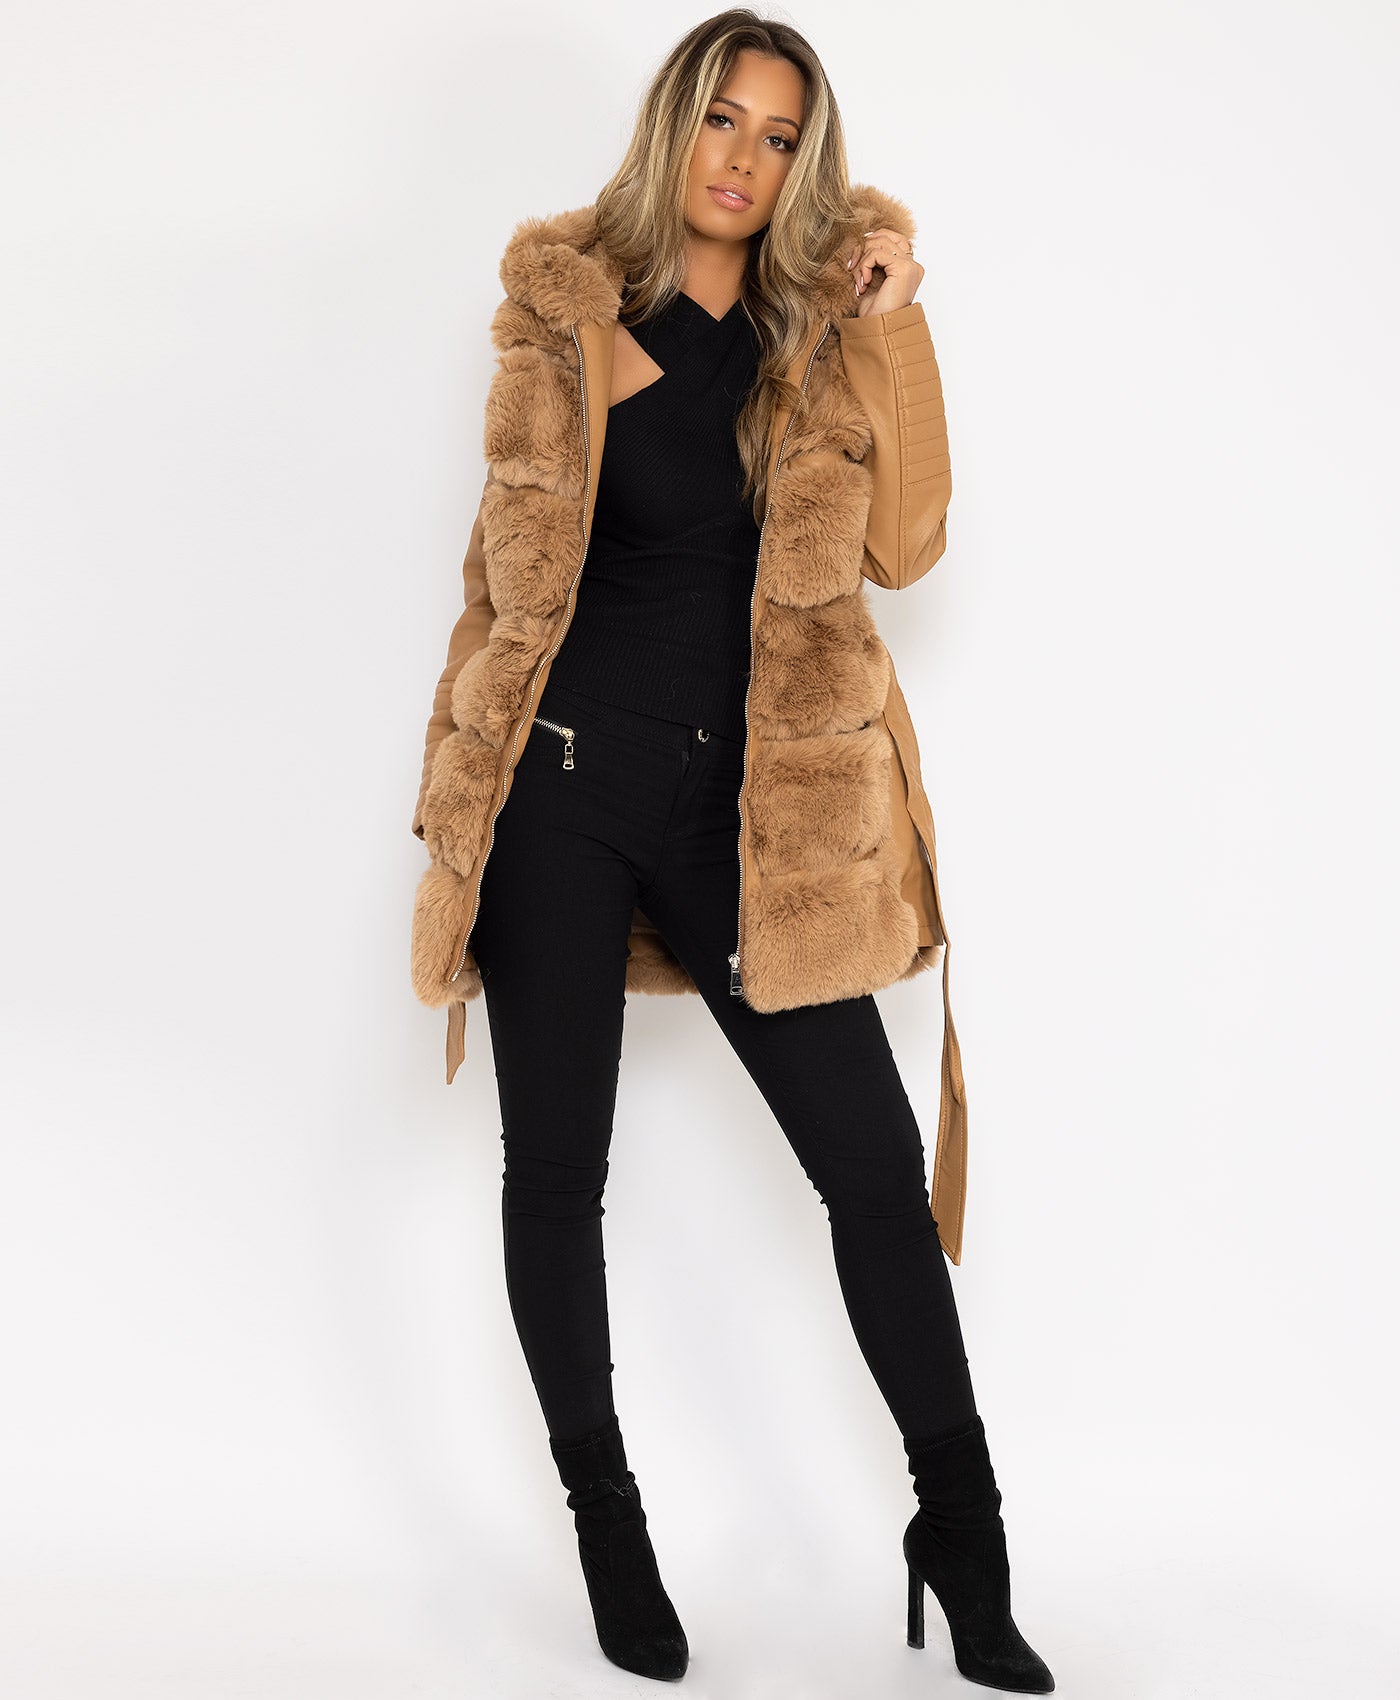 Camel-Pu-Pvc-Tiered-Faux-Fur-Hooded-3-4-Coat-Jacket-4